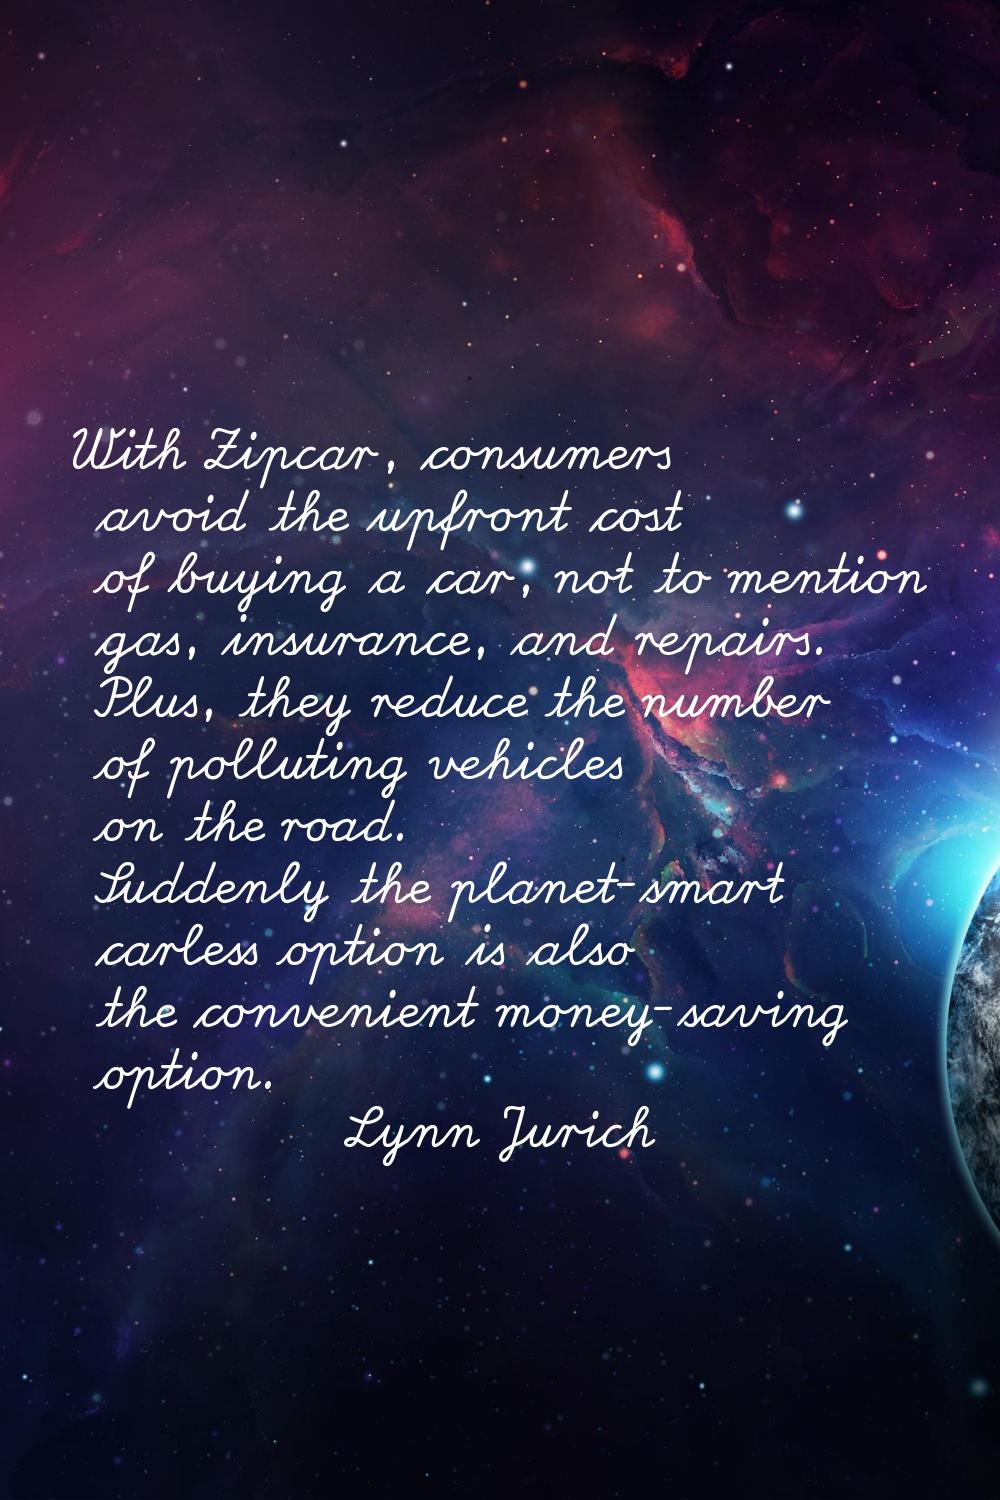 With Zipcar, consumers avoid the upfront cost of buying a car, not to mention gas, insurance, and r